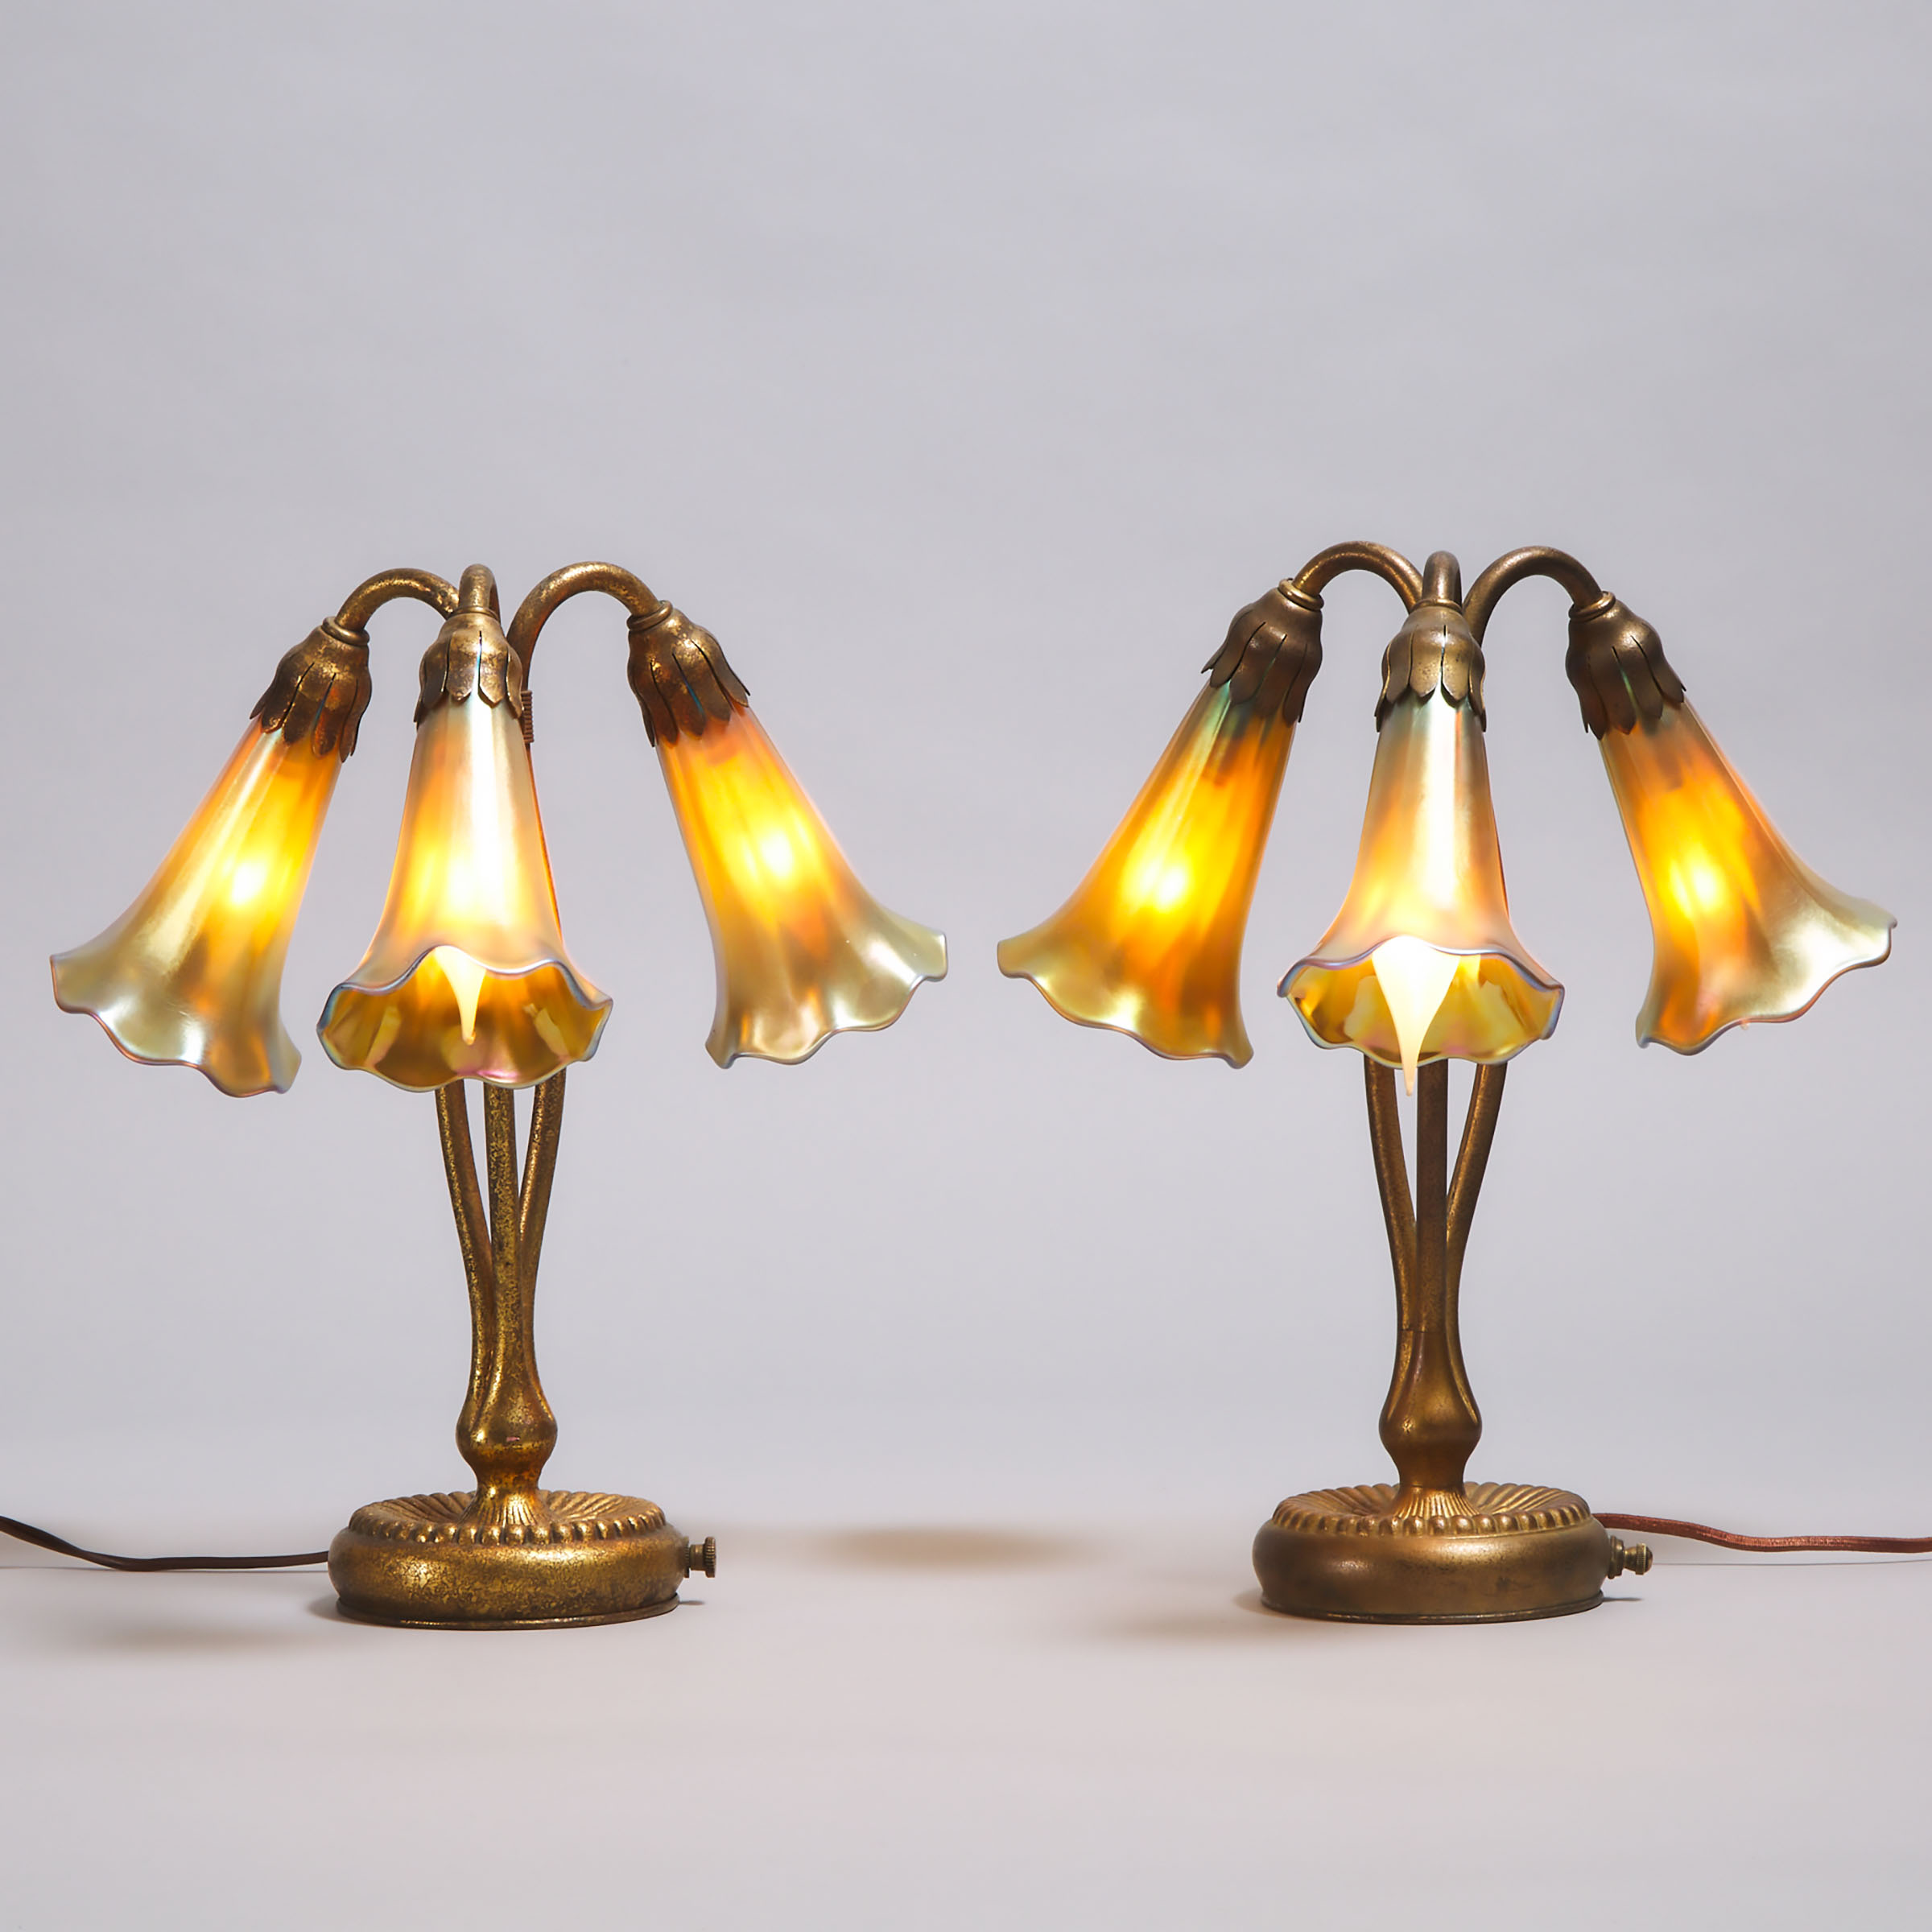 Pair of Tiffany Studios, New York, Gilt Bronze Three Light Table Lamps, c.1904 and later